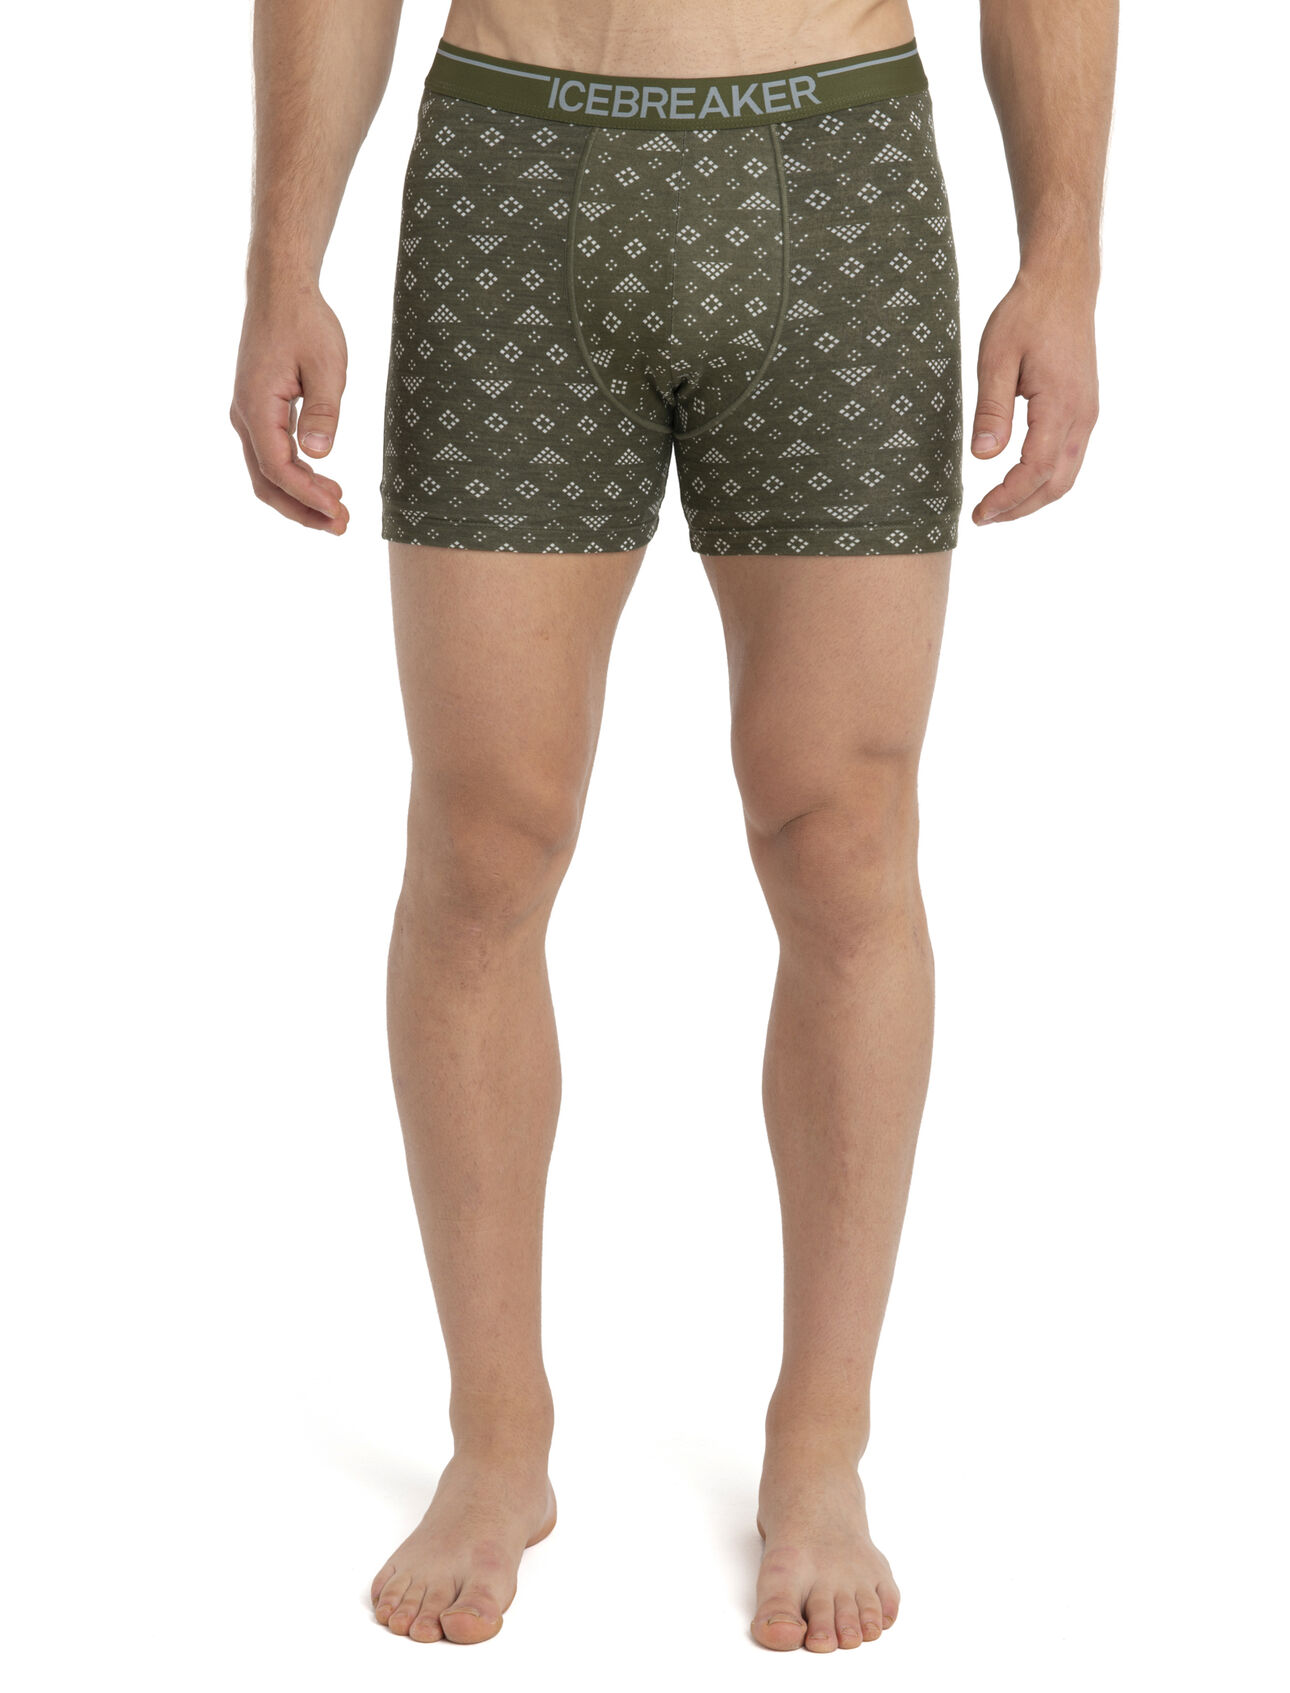  M ANATOMICA BOXERS LODEN - merino boxer shorts for